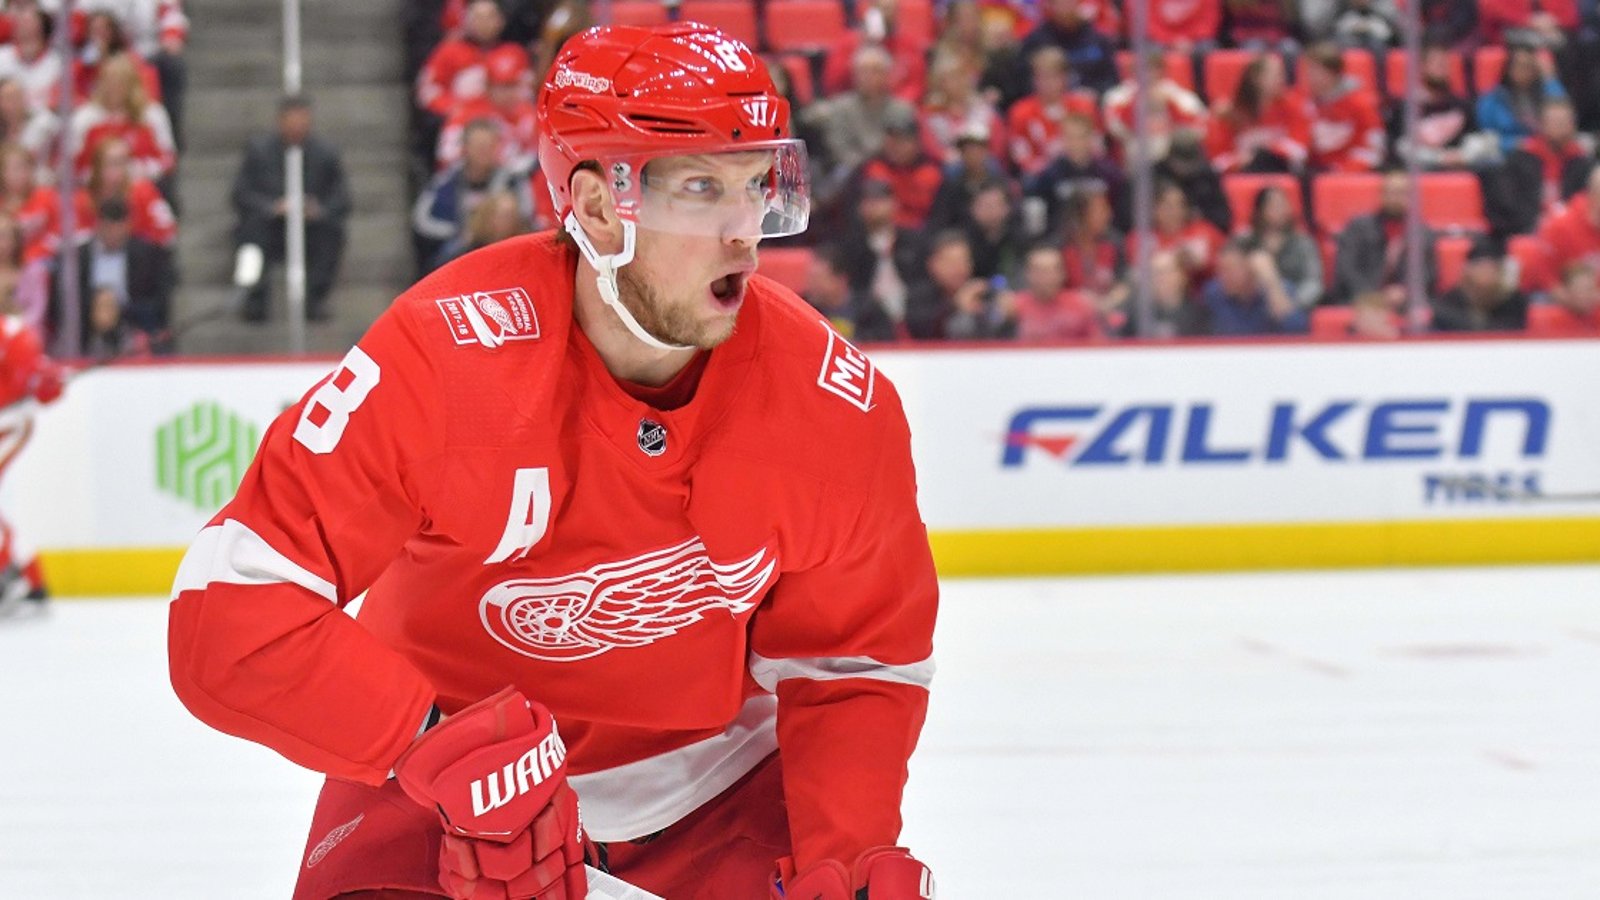 4 Red Wings get an “F” grade for their performance this season.